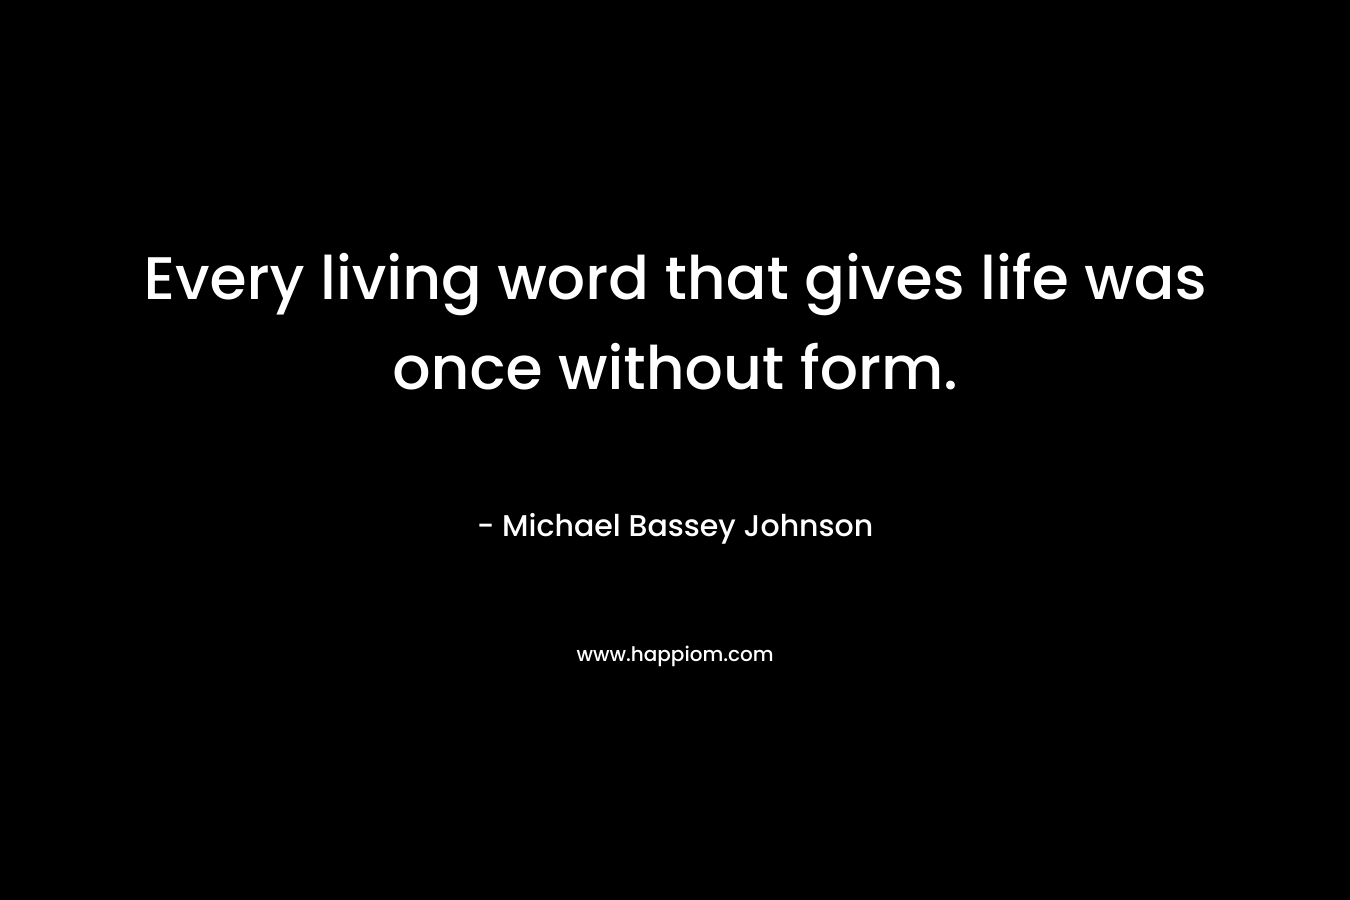 Every living word that gives life was once without form.